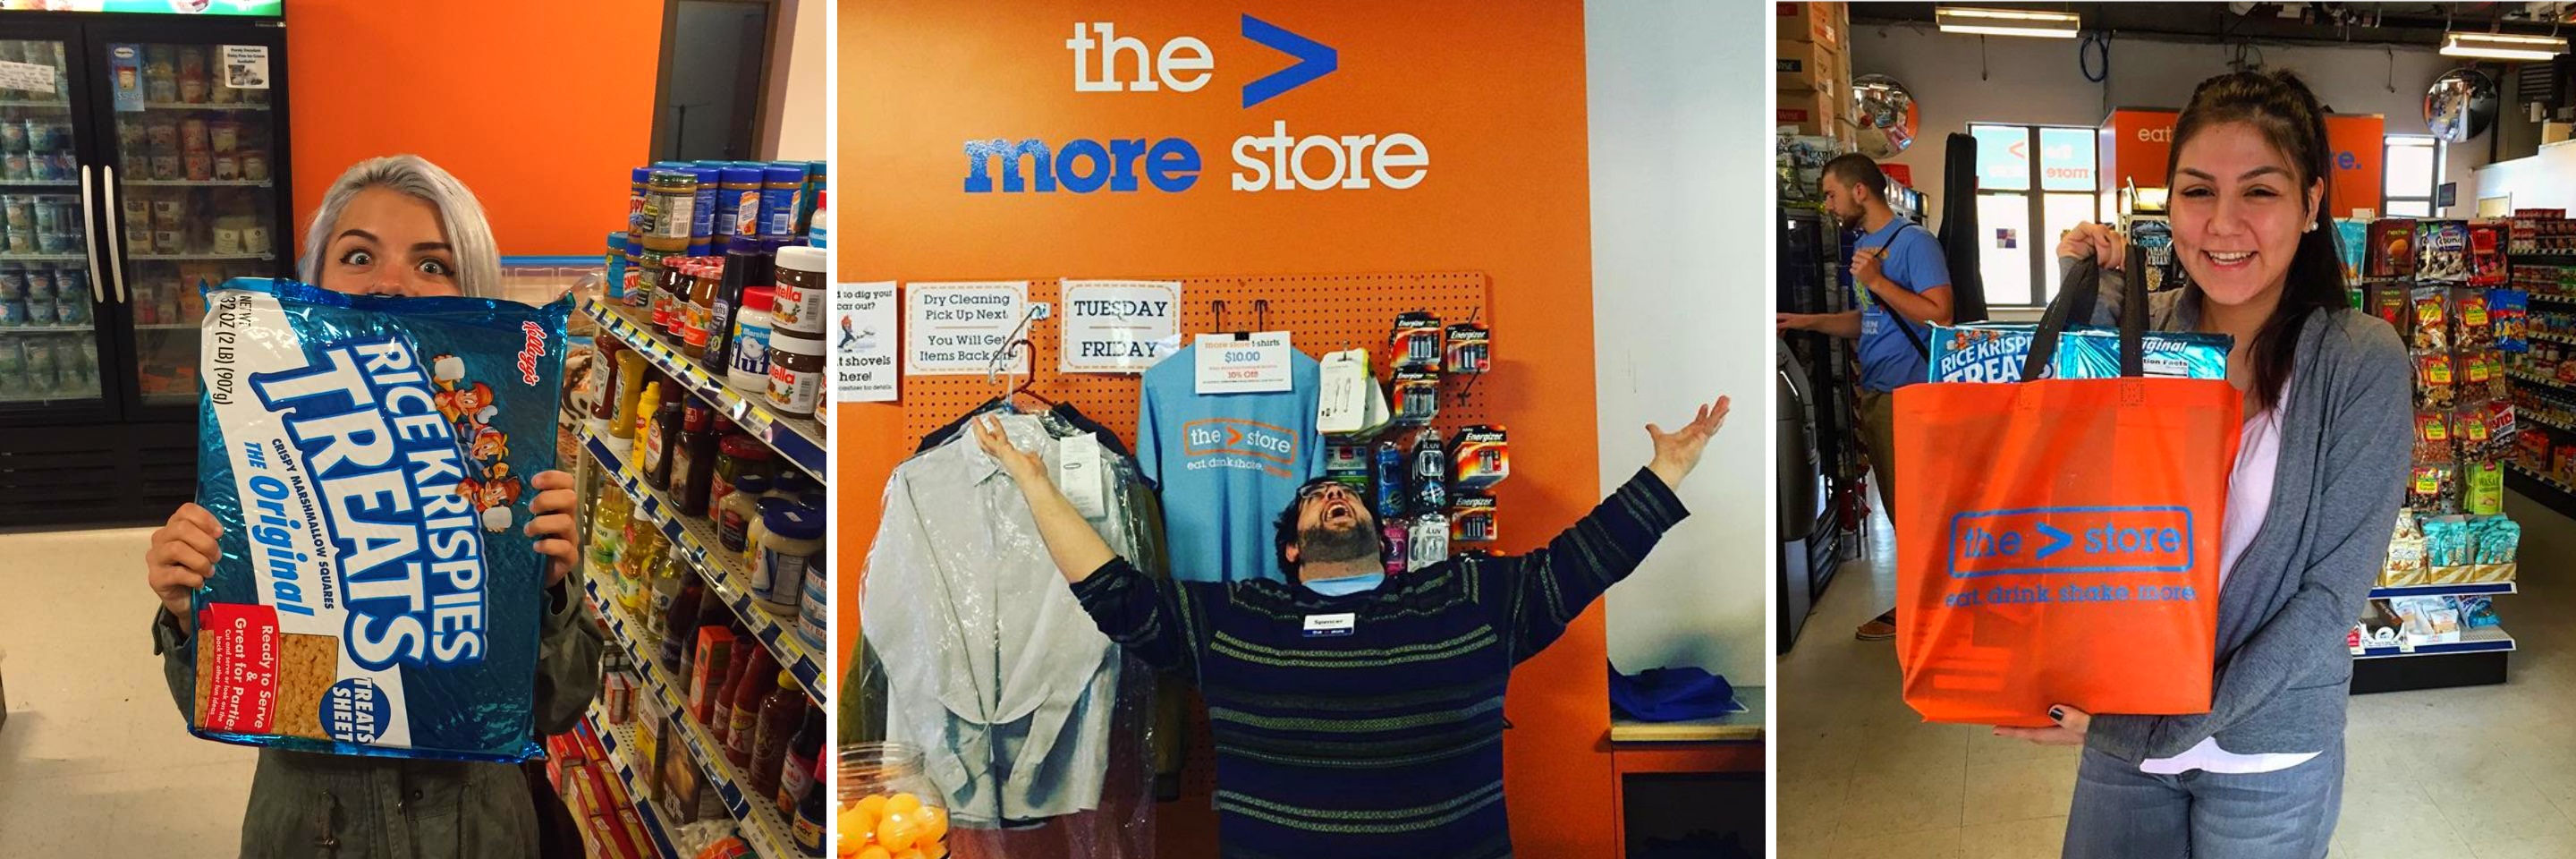 Welcome to the More Store. Pictured left to right: Paris Ray with a mega Rice Krispie Treat, More...